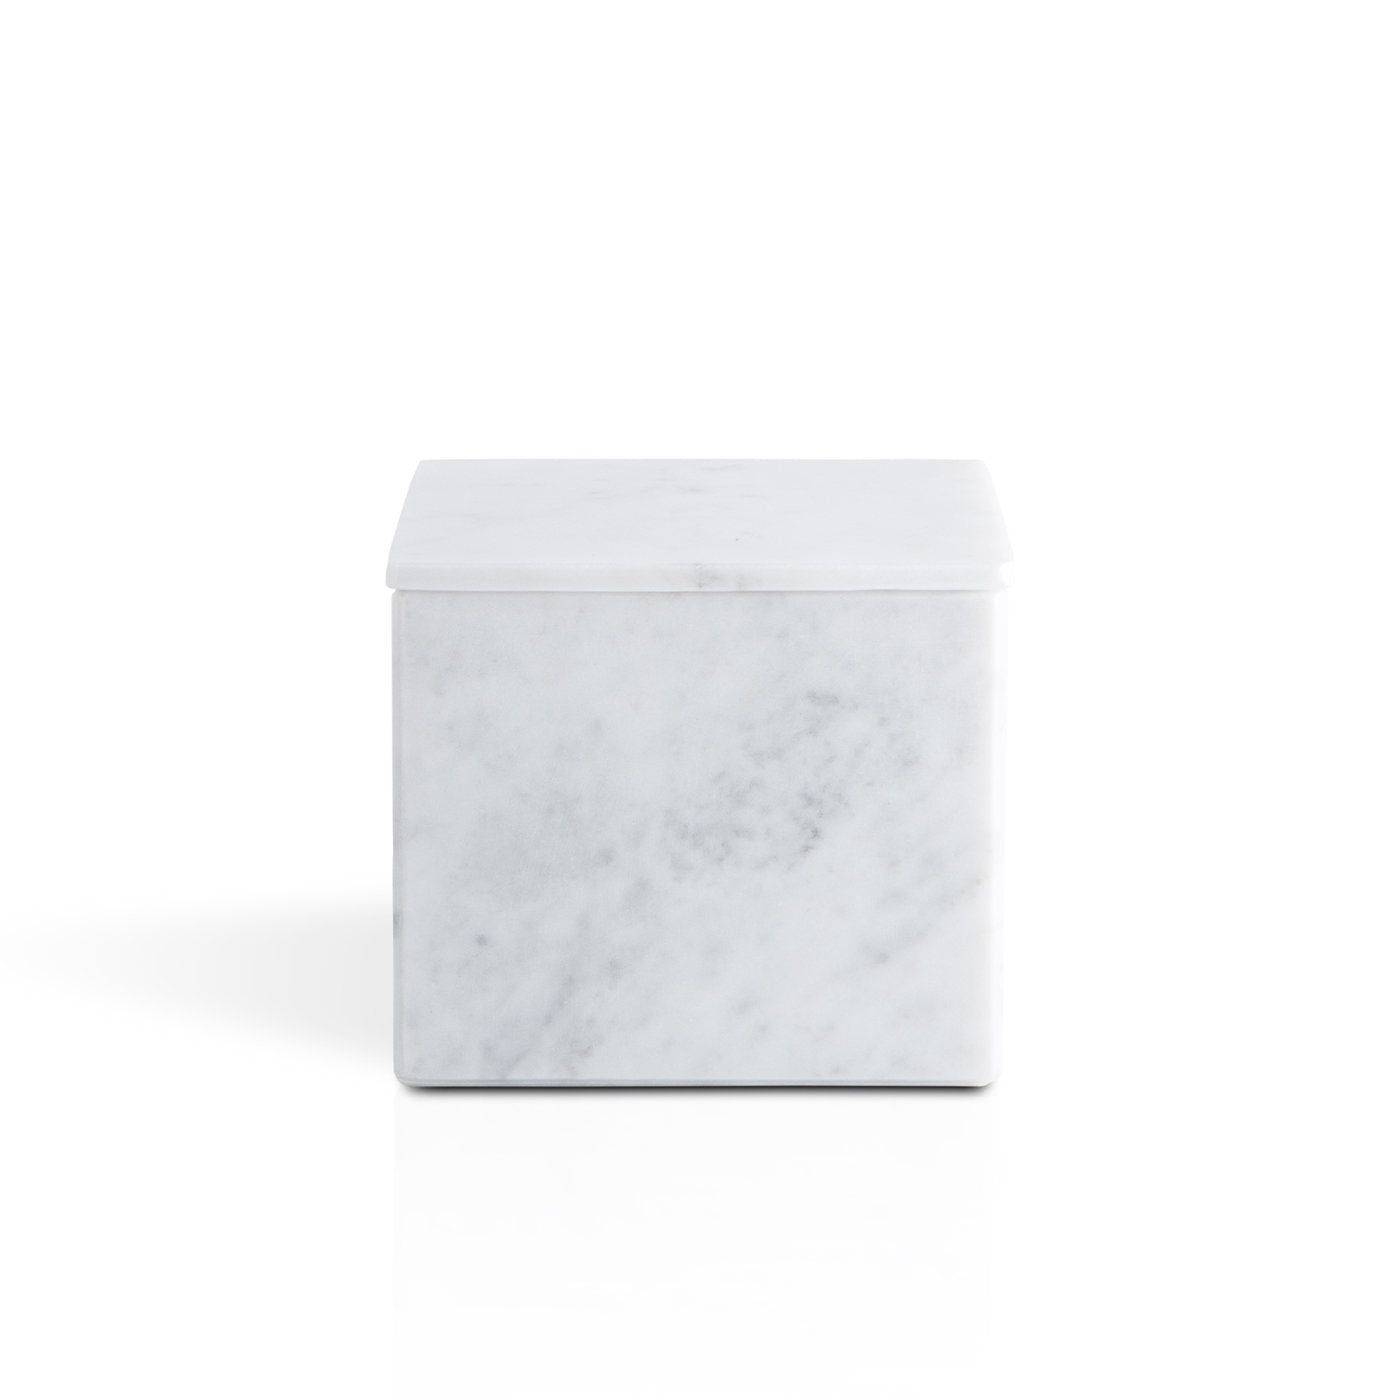 White Carrara Marble Cubic Box with Lid - Alternative view 1